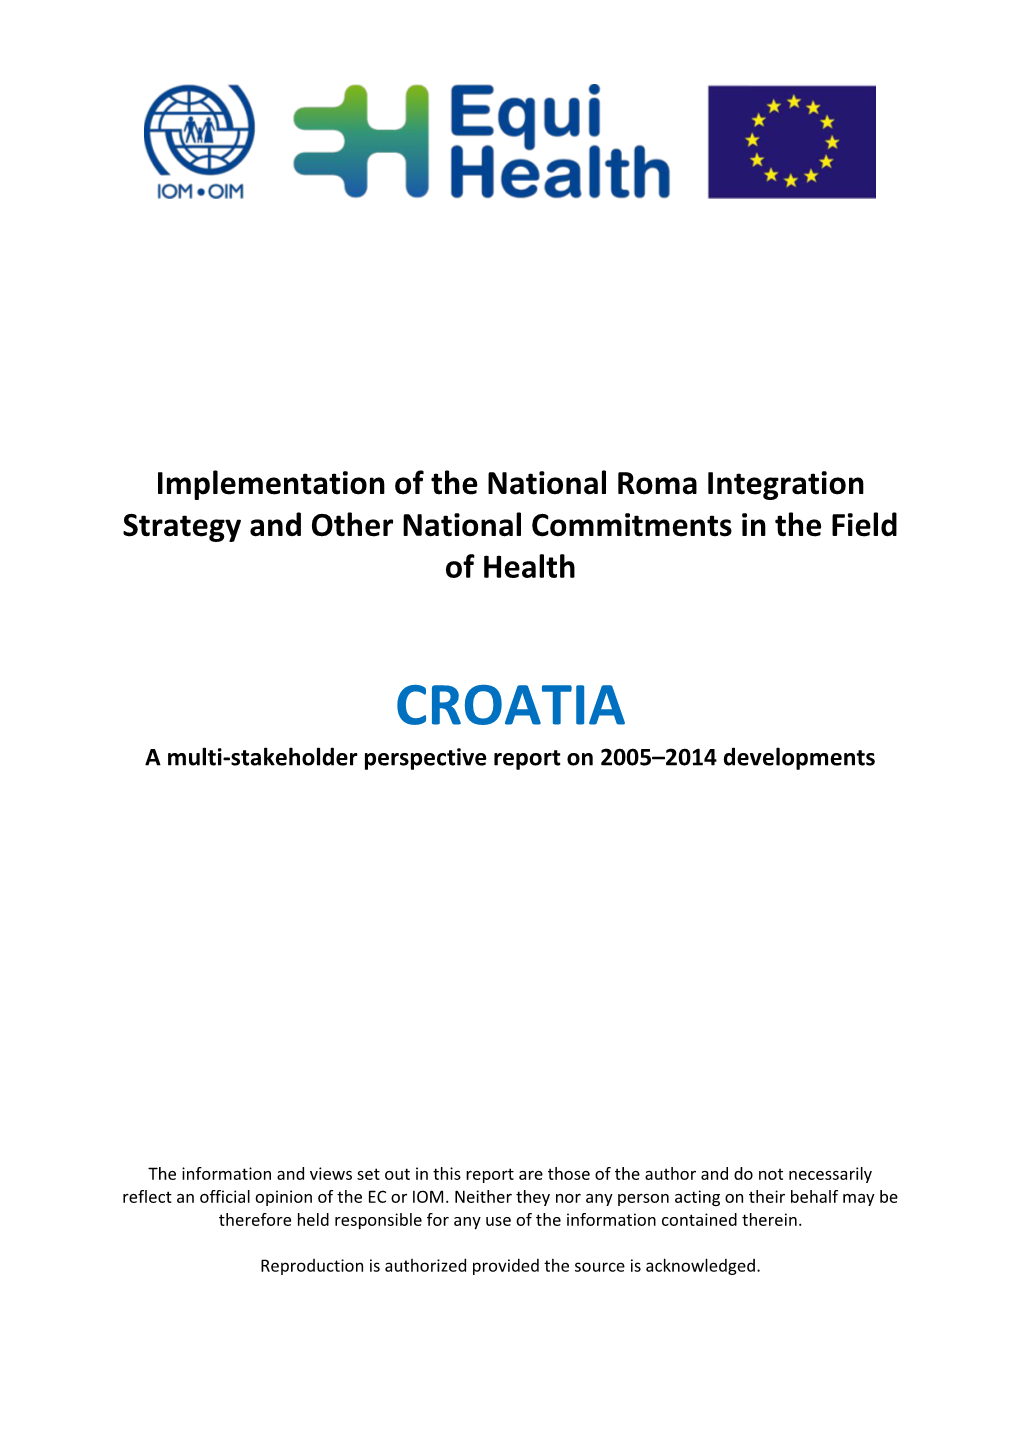 CROATIA a Multi-Stakeholder Perspective Report on 2005–2014 Developments